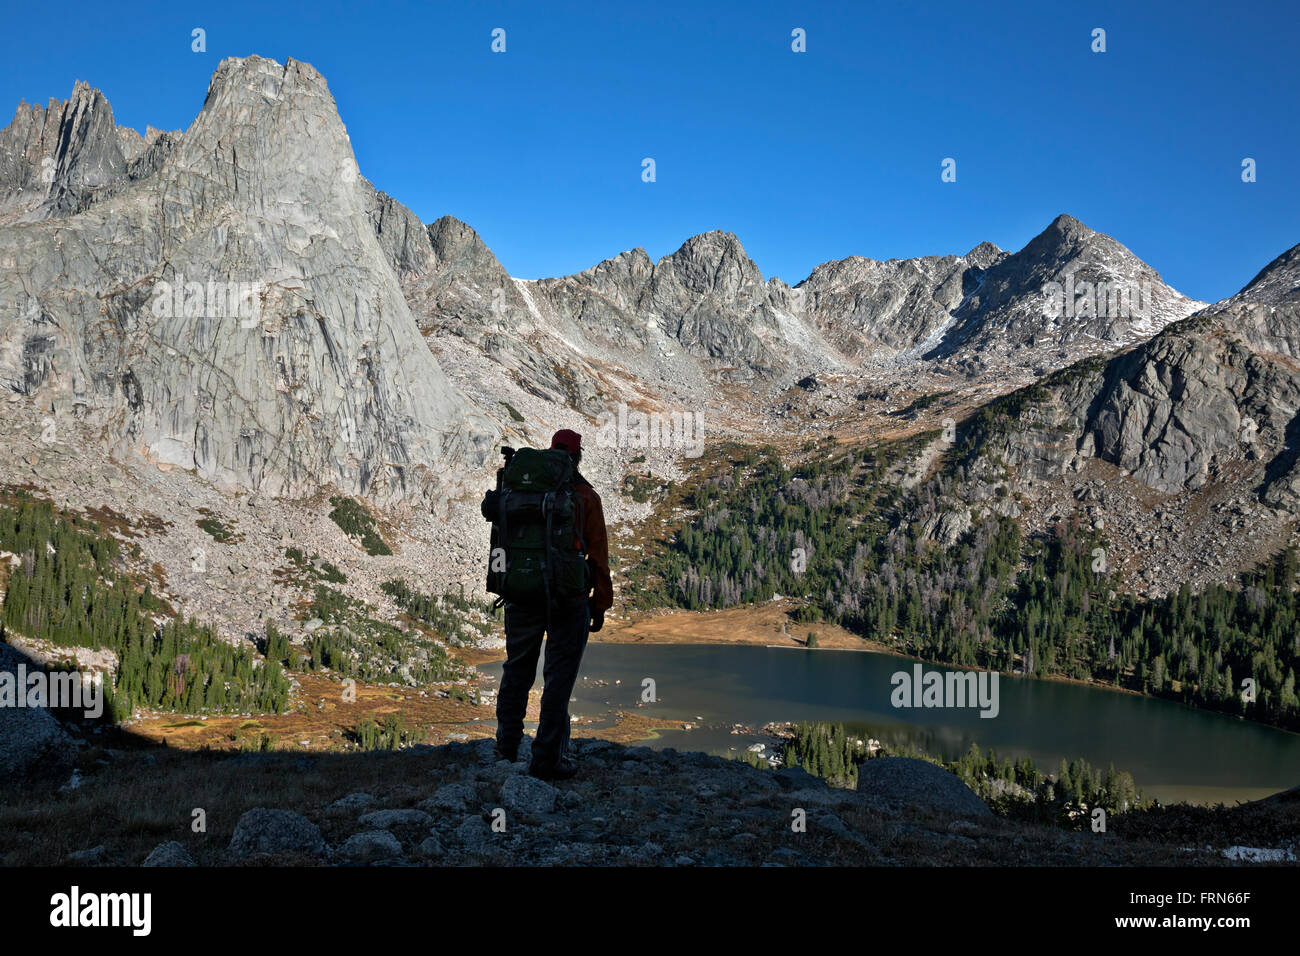 WYOMING - Hiker on Big Sandy Pass Trail overlooking Lonesome Lake surrounded by the Cirque of the Towers in Wind River Range. Stock Photo